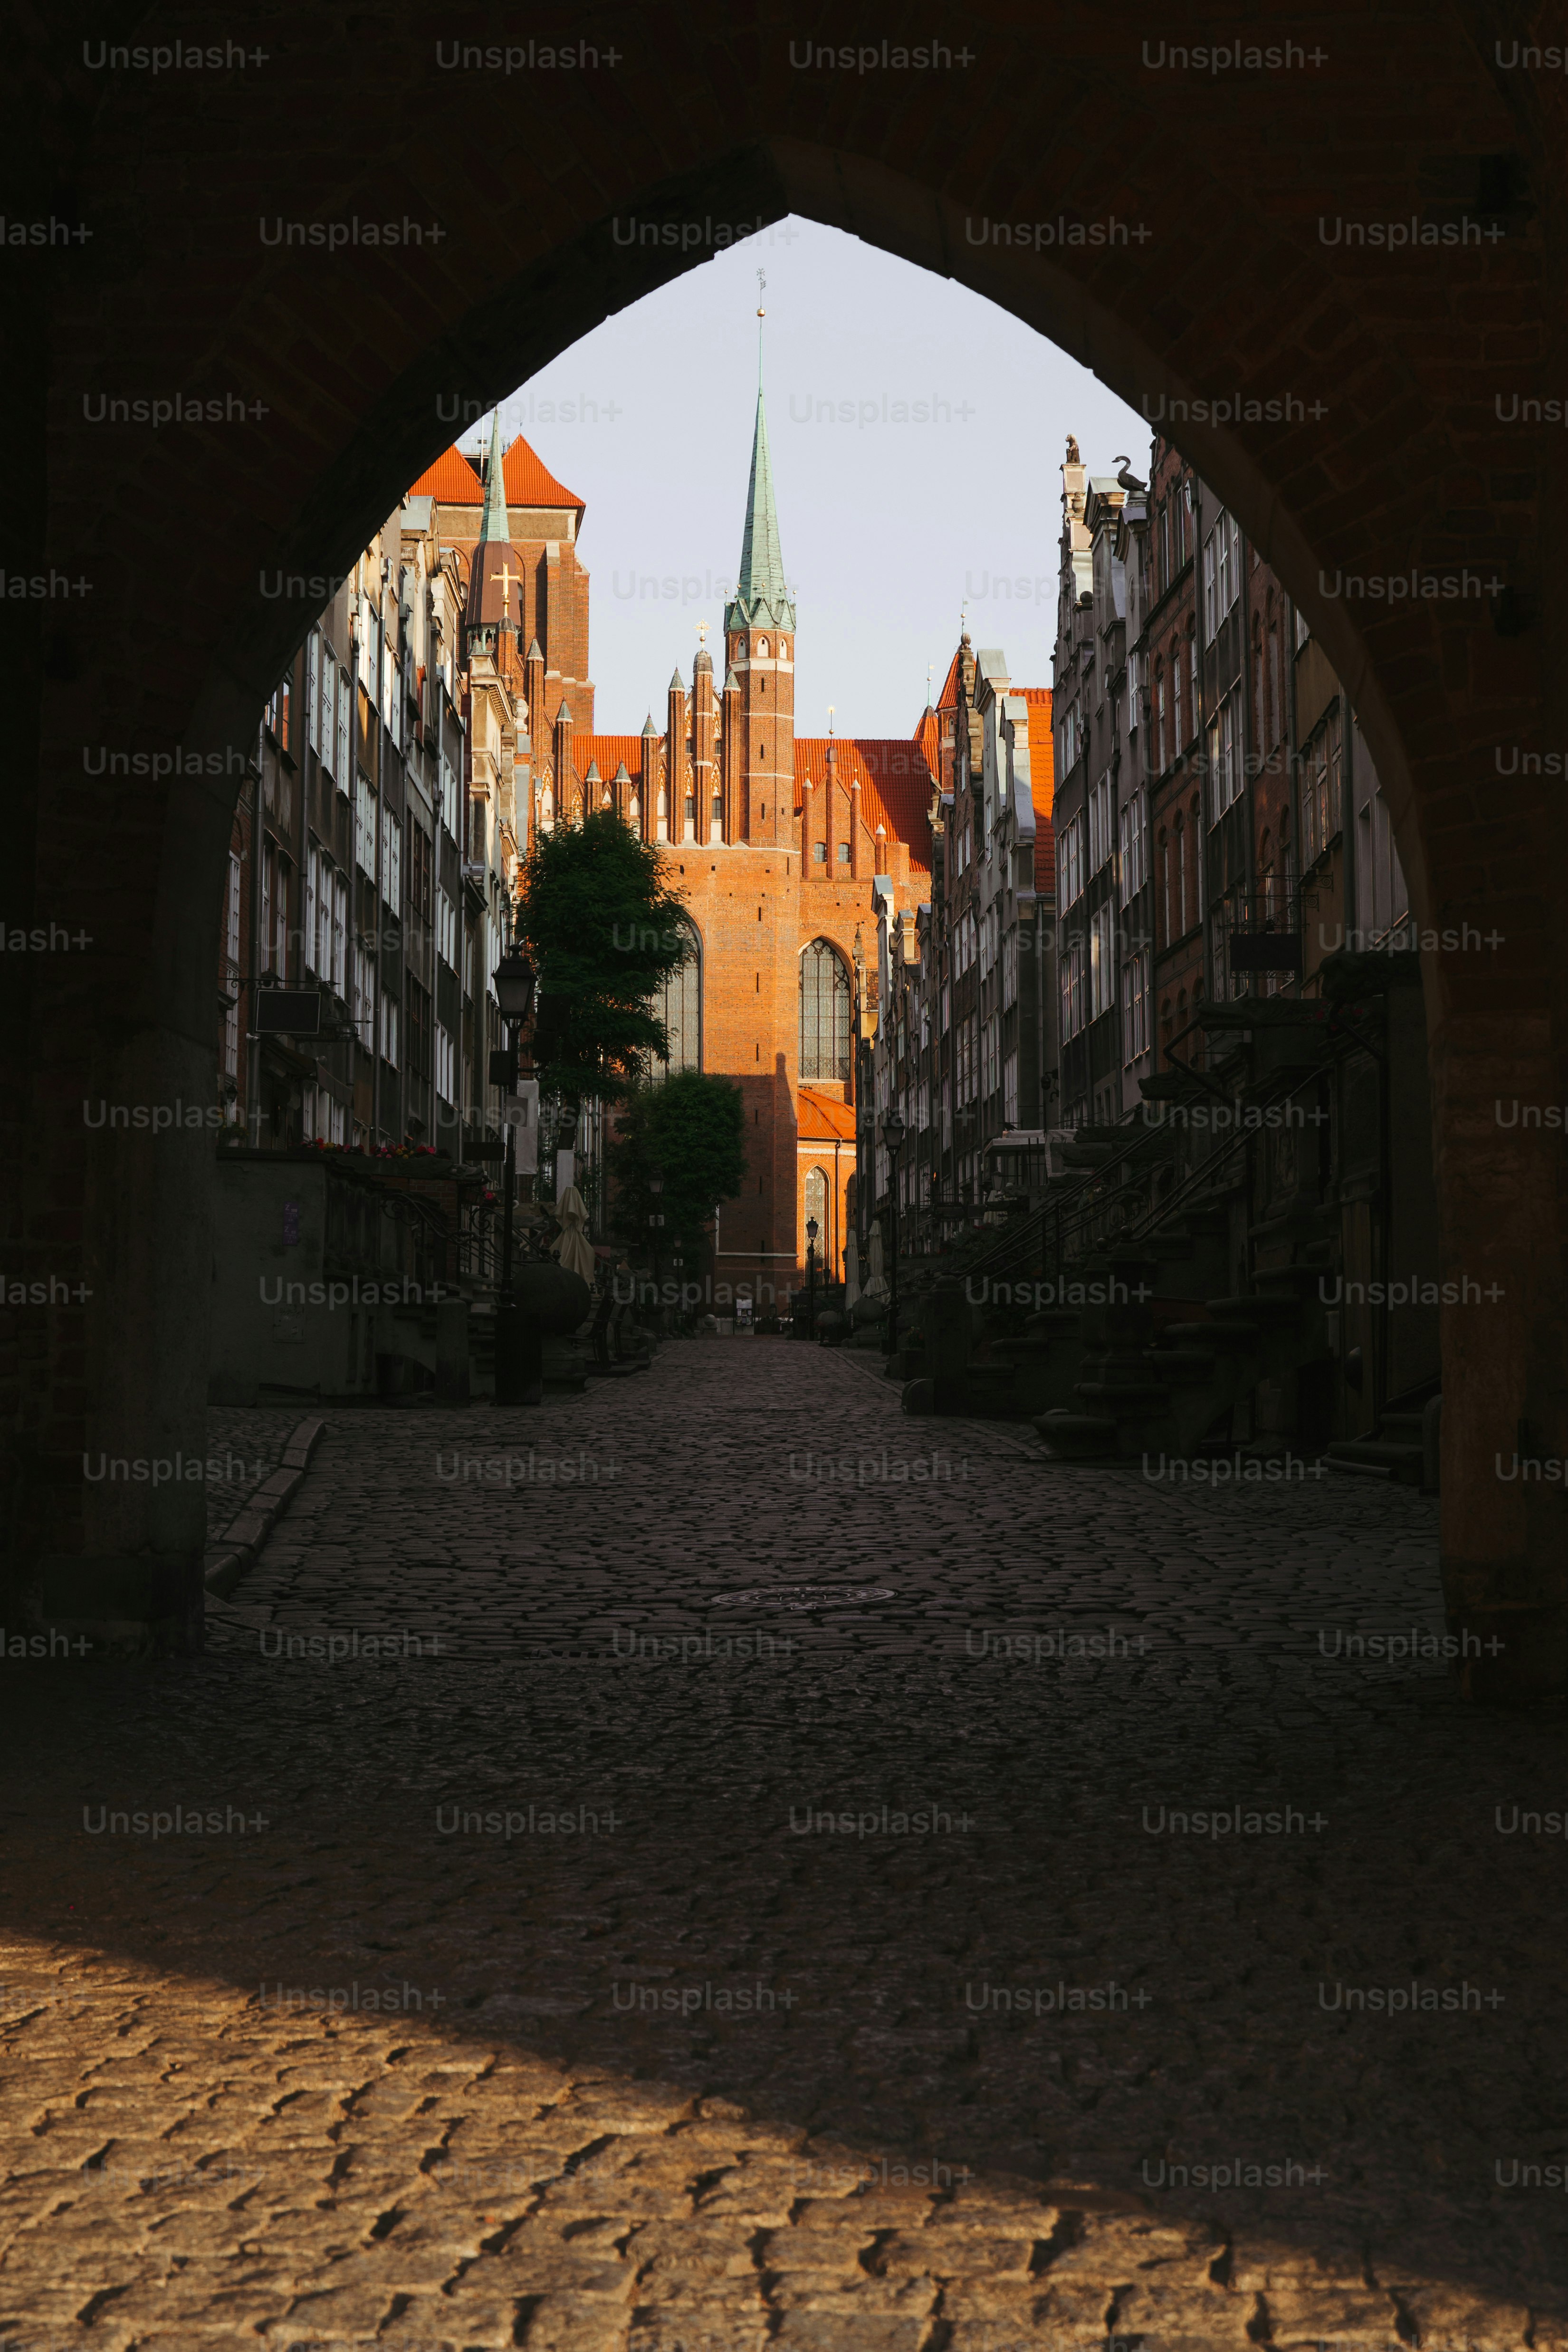 One of the most iconic views in Gdańsk, Poland